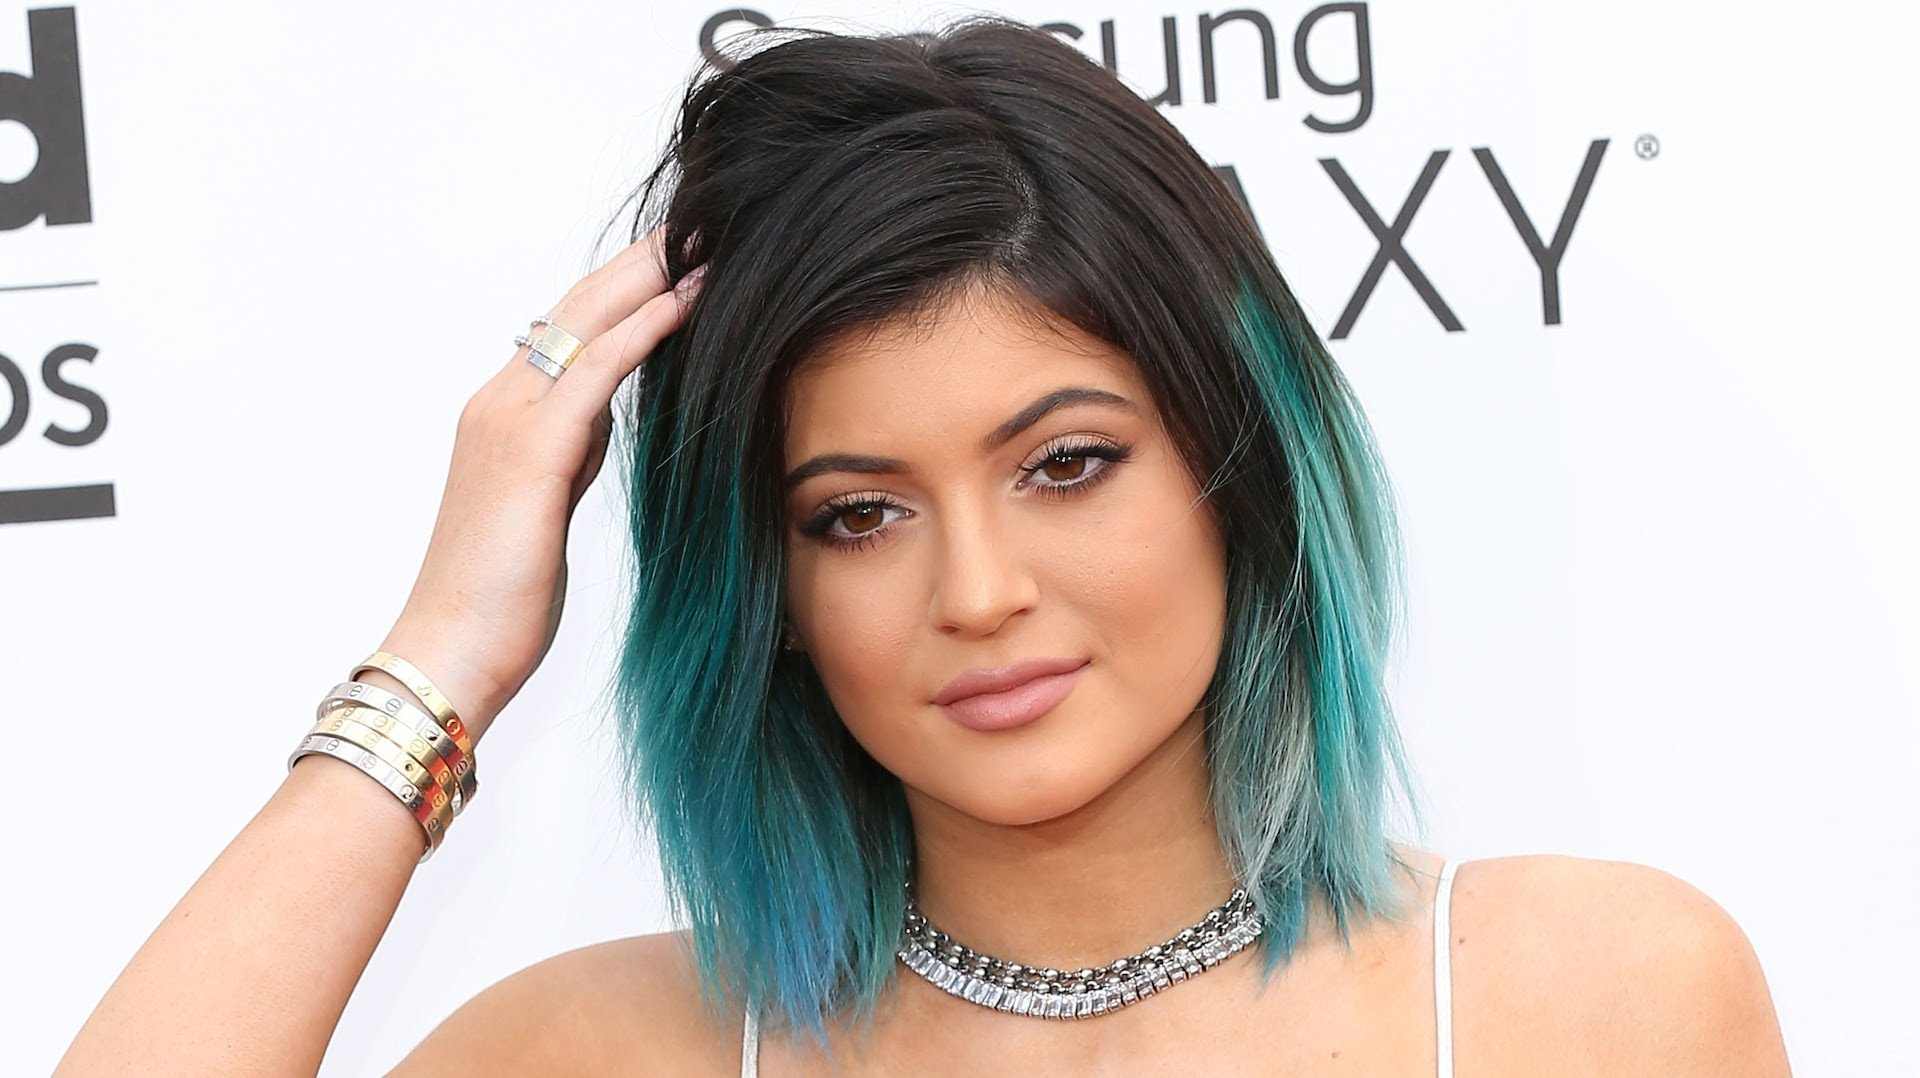 8. "Neon Blue Green Ombre Hair: The Best Products to Use for Vibrant Color" - wide 5